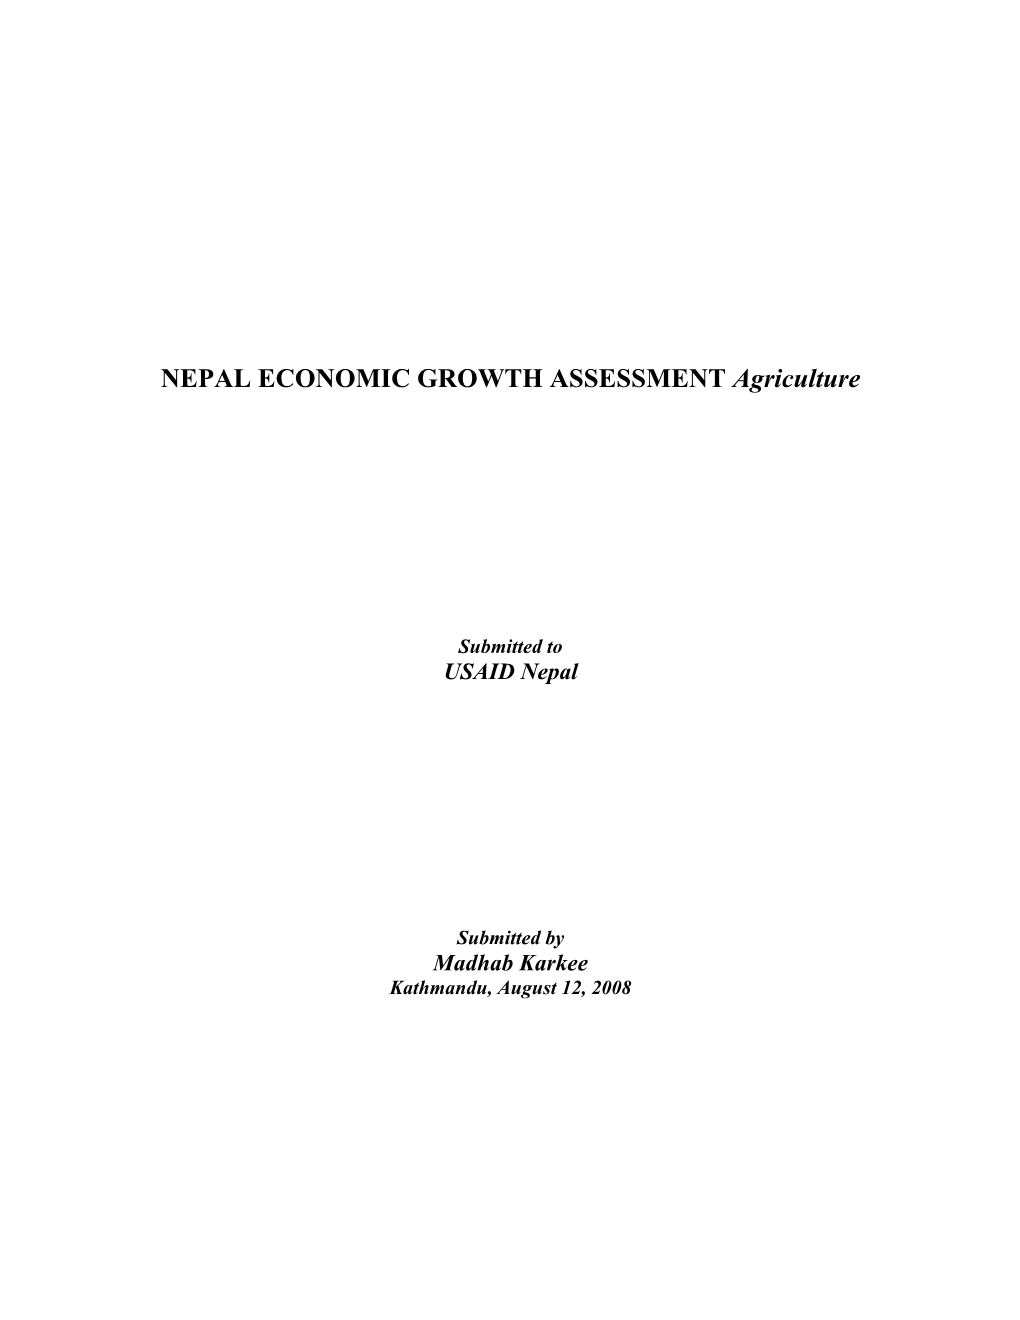 NEPAL ECONOMIC GROWTH ASSESSMENT Agriculture